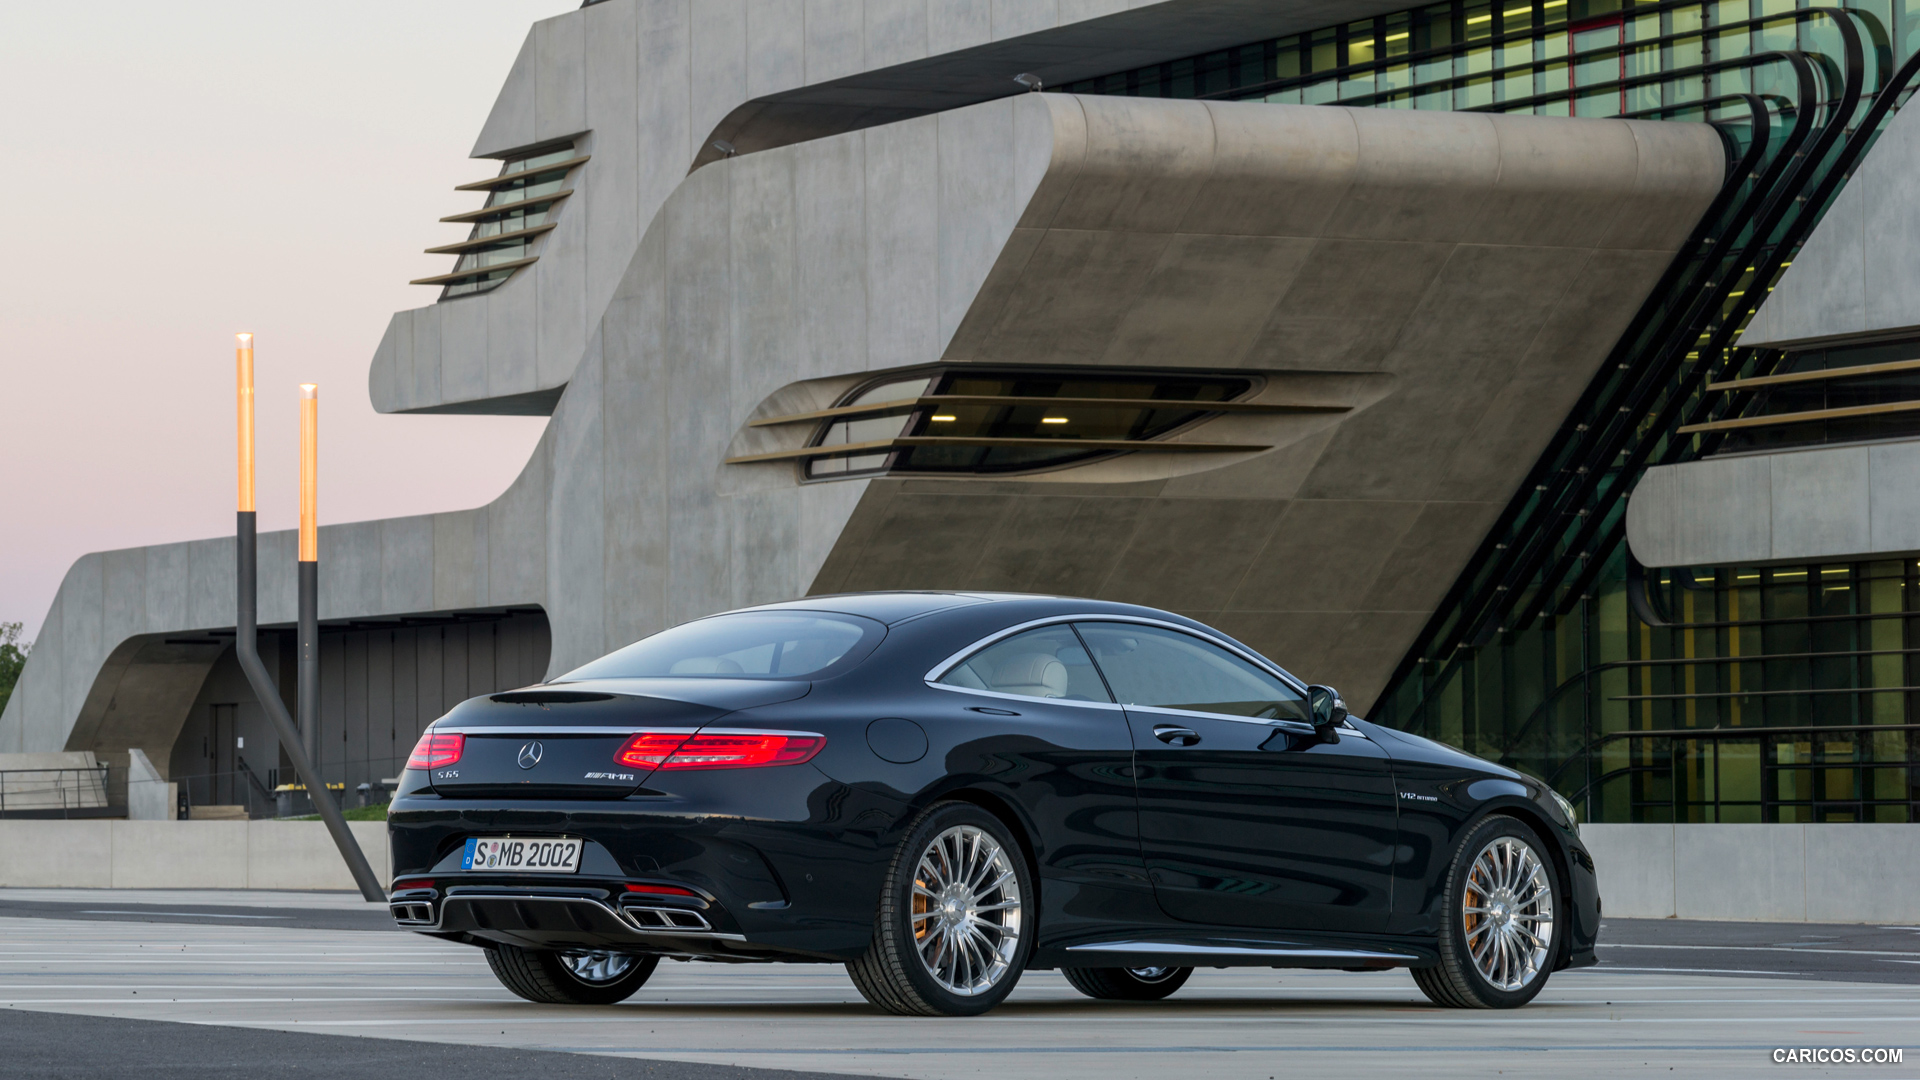 2015 Mercedes-Benz S65 AMG Coupe (Anthracite Blue) - Rear, #12 of 101